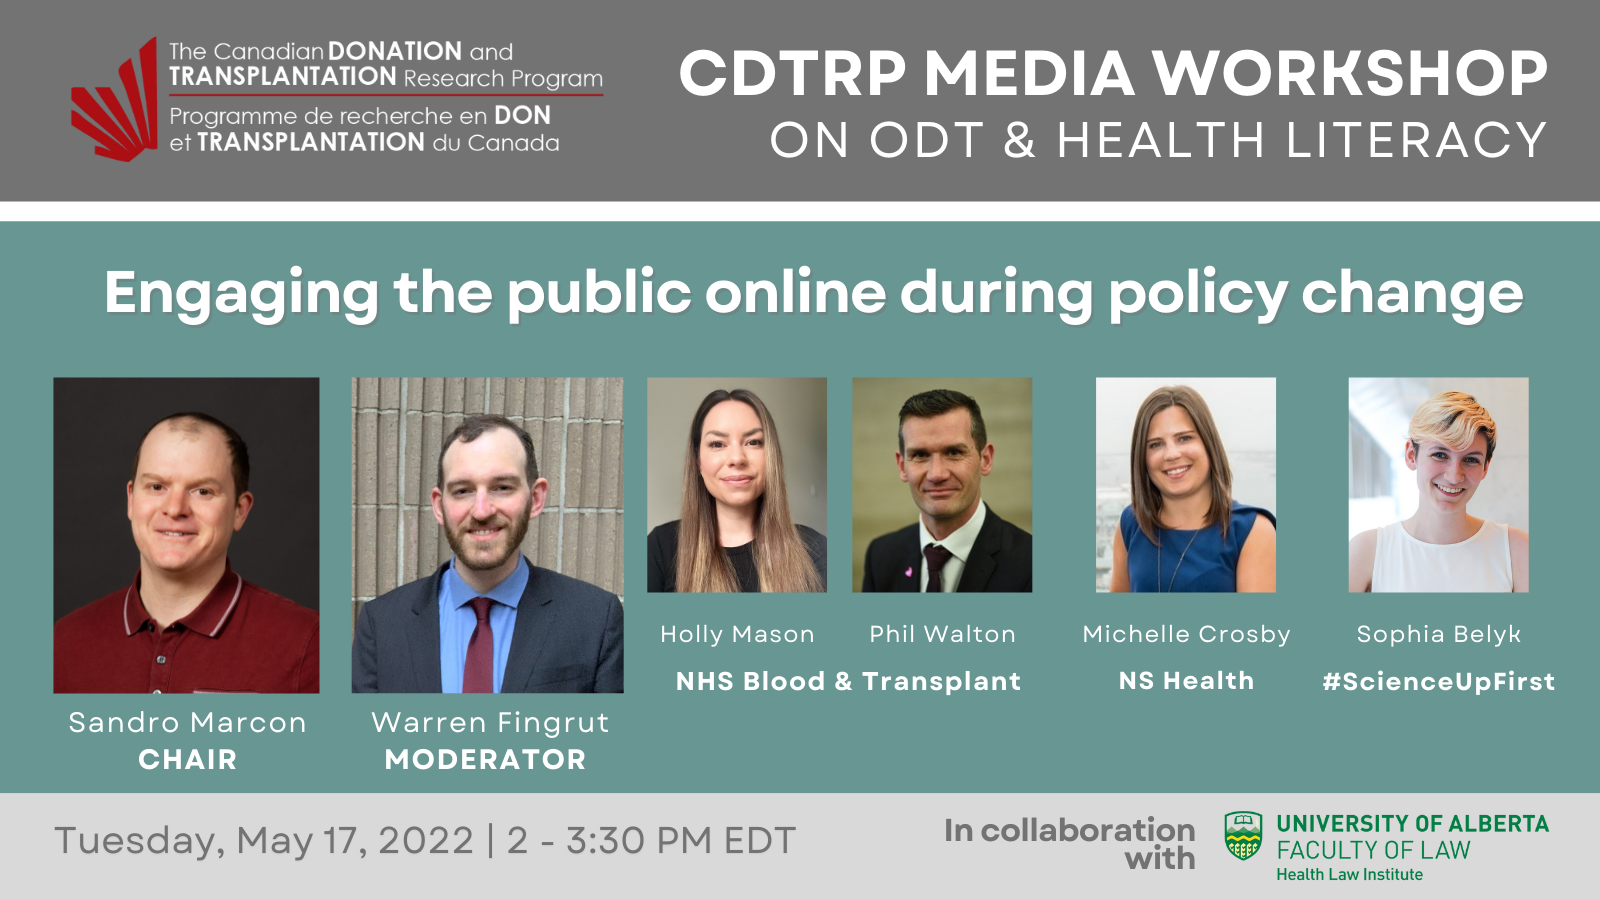 CDTRP Media Workshop on ODT & Health Literacy: Engaging the public online  during policy change – Canadian Donation and Transplantation Research  Program